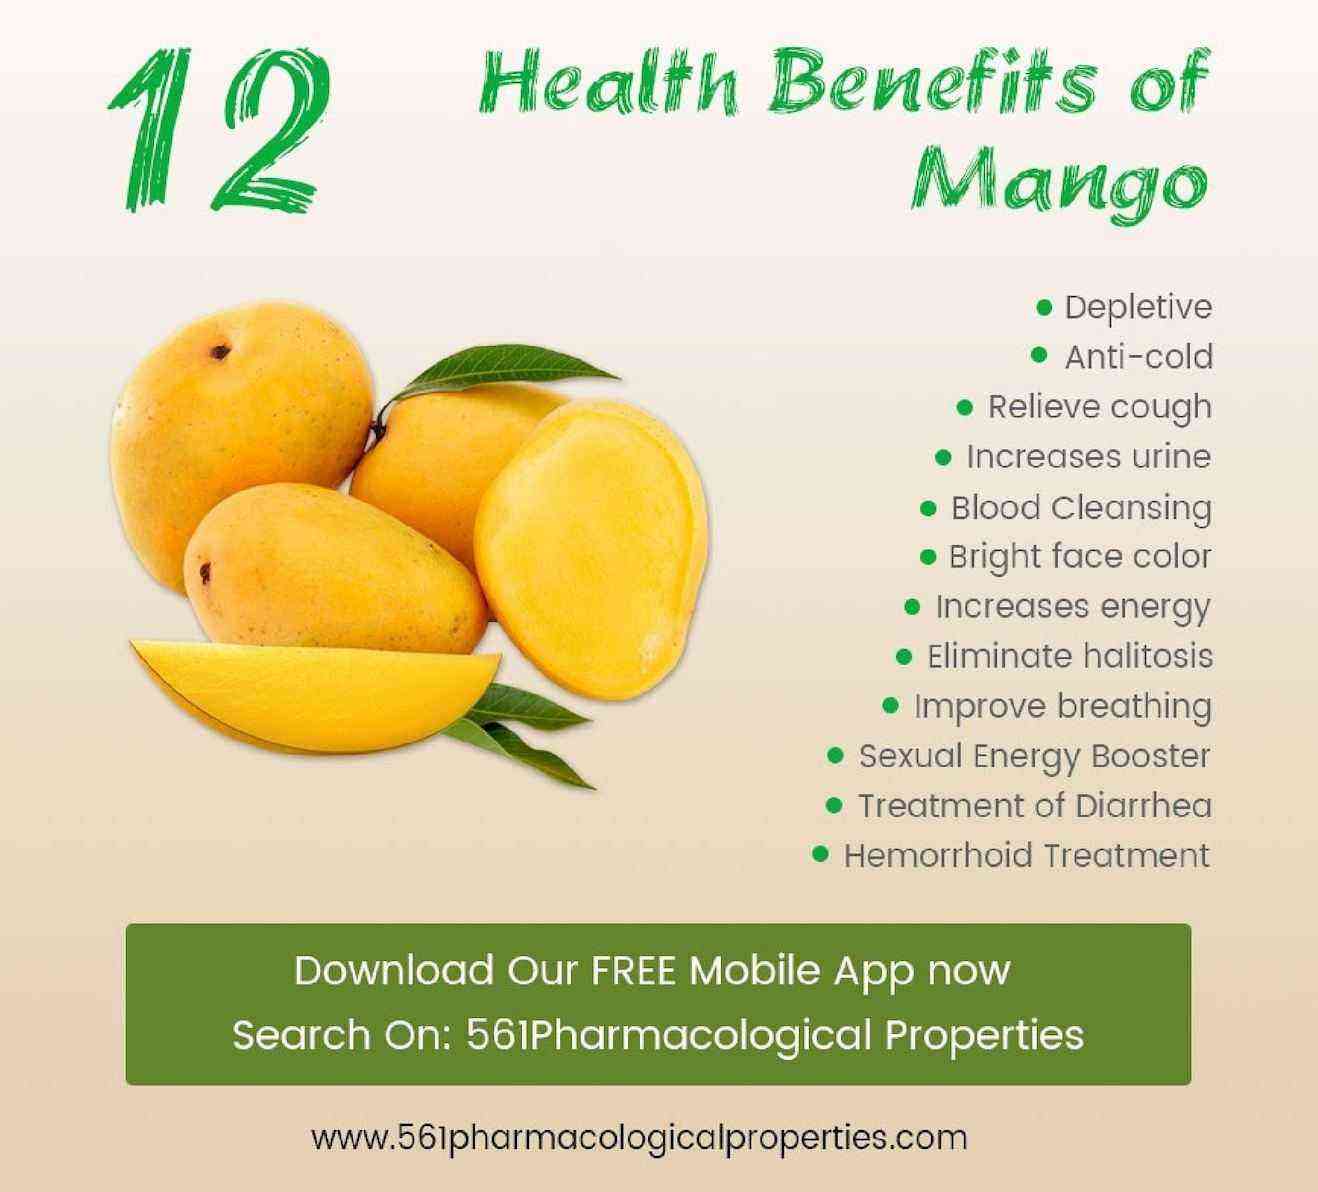 Mango benefits and harms